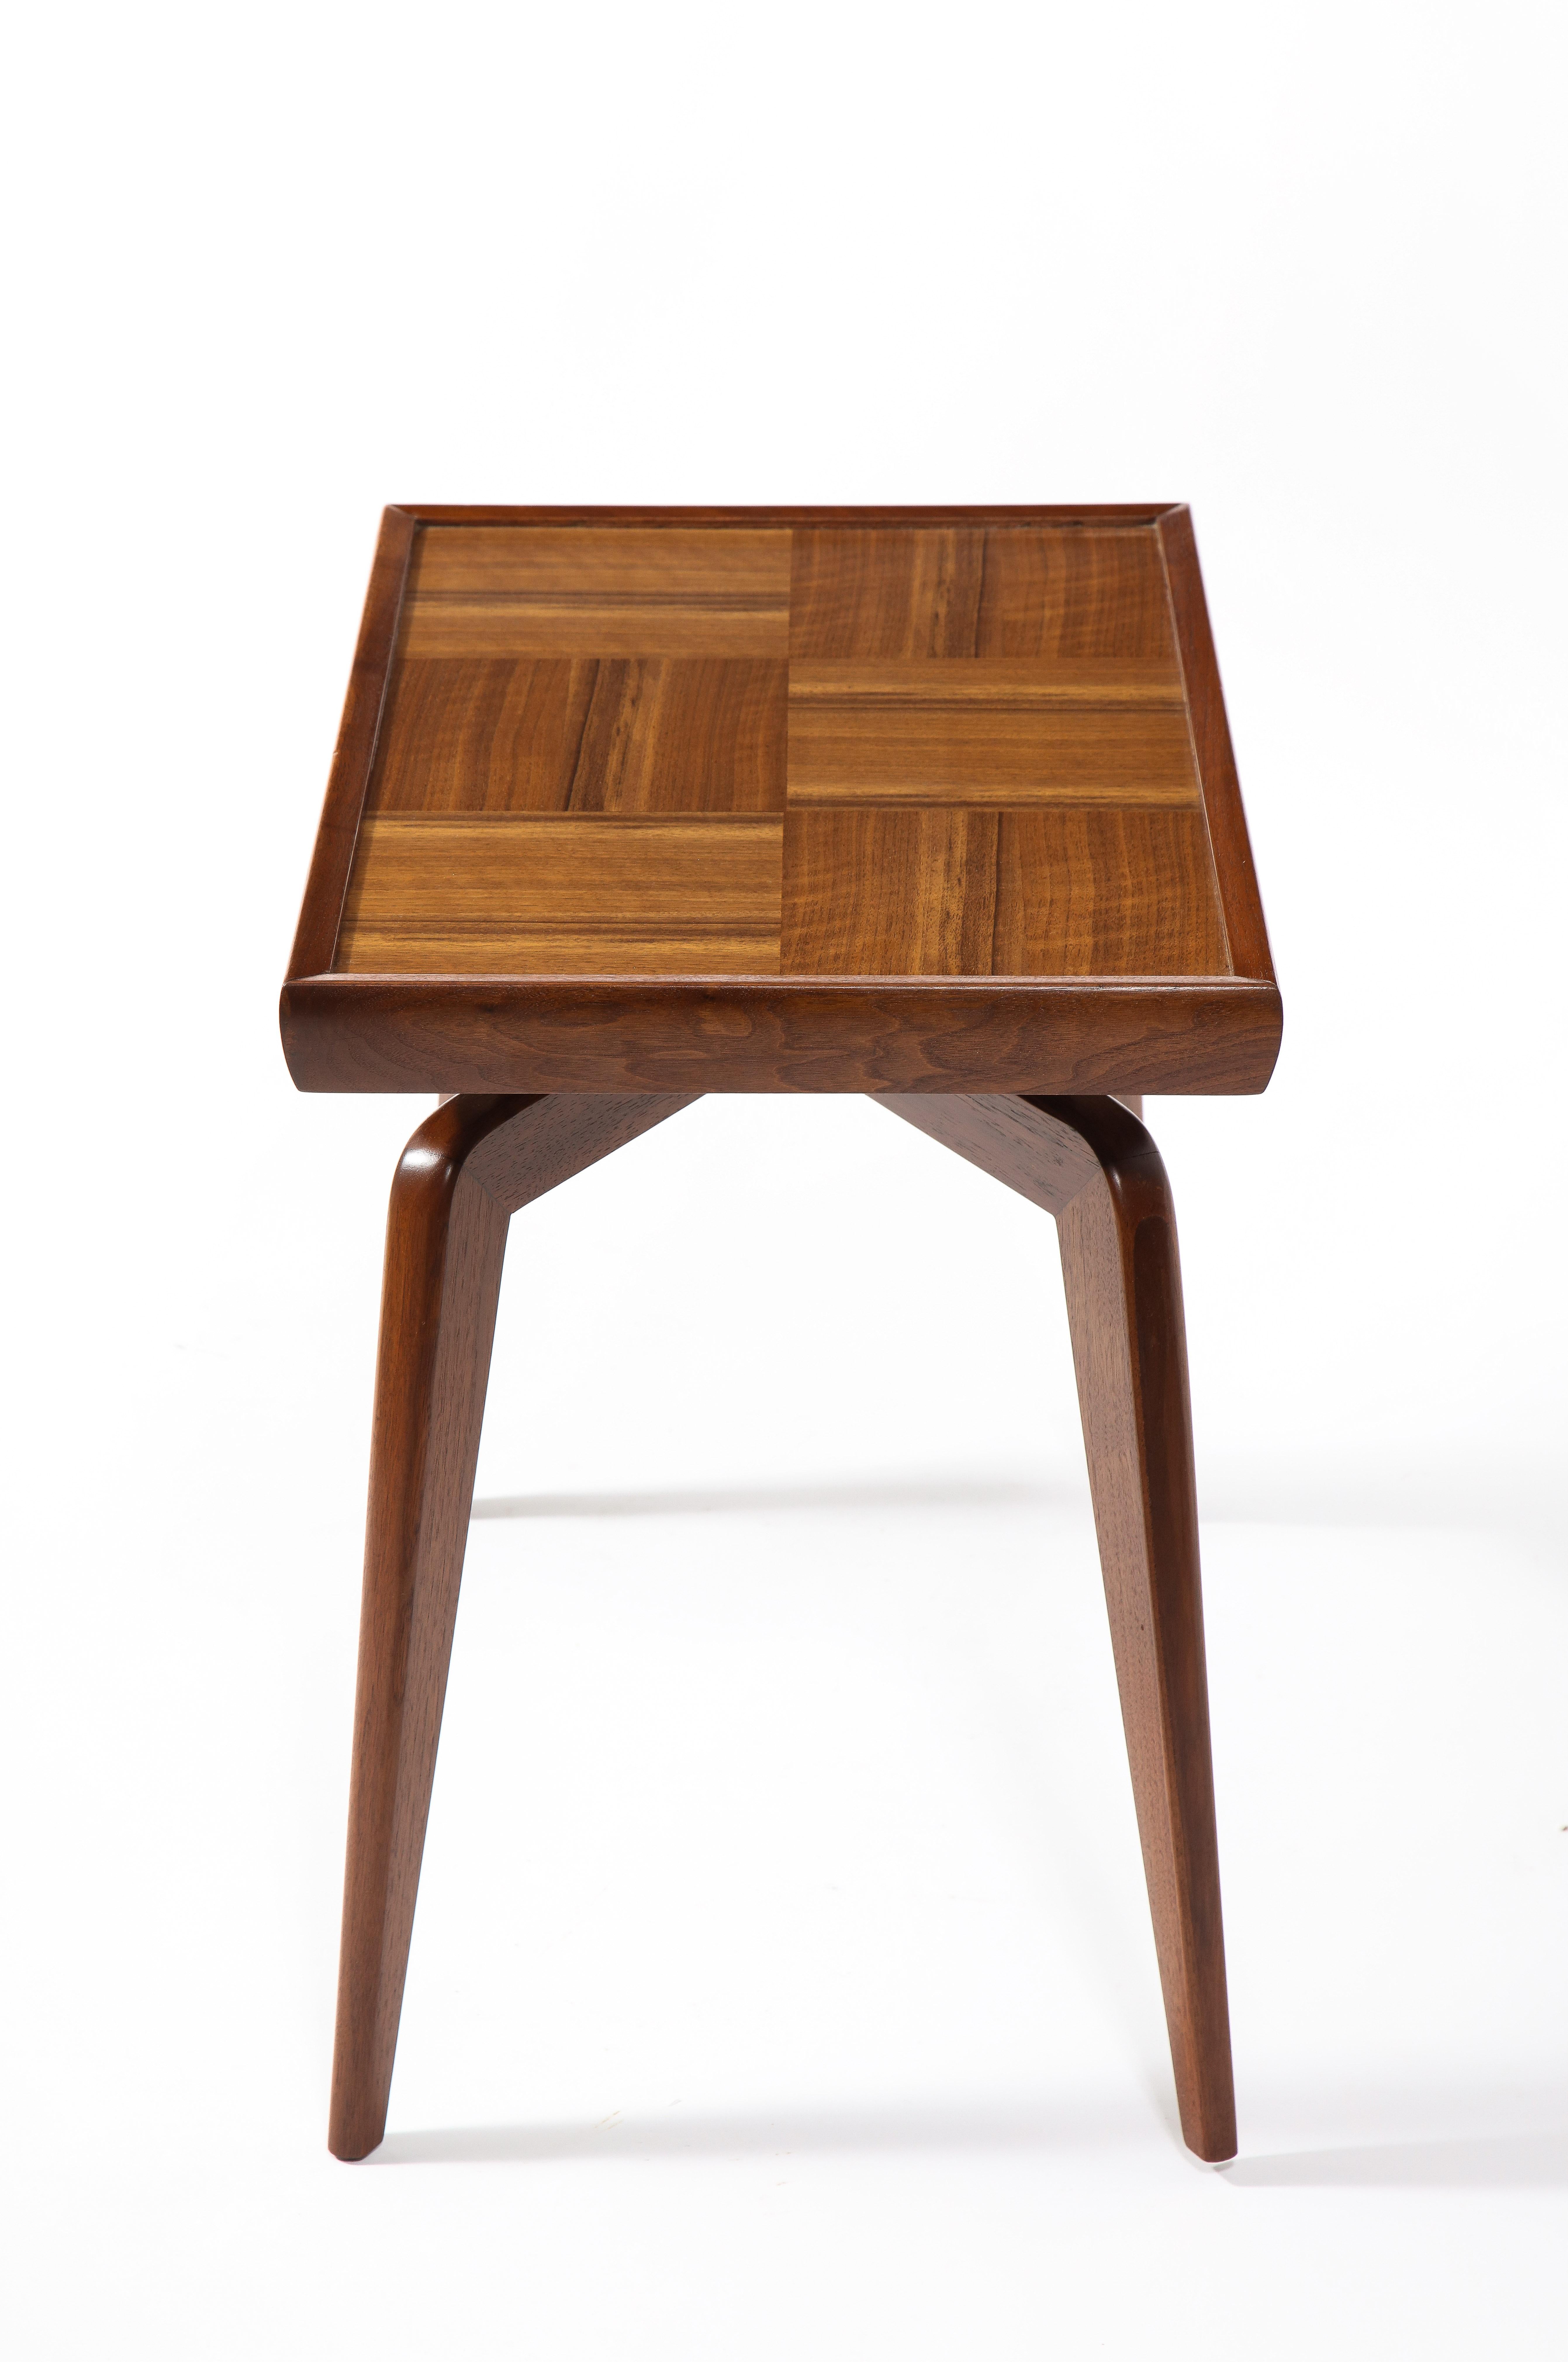 A pair of walnut tables by Superior furnishings, on four legs with a recess under the top tray.